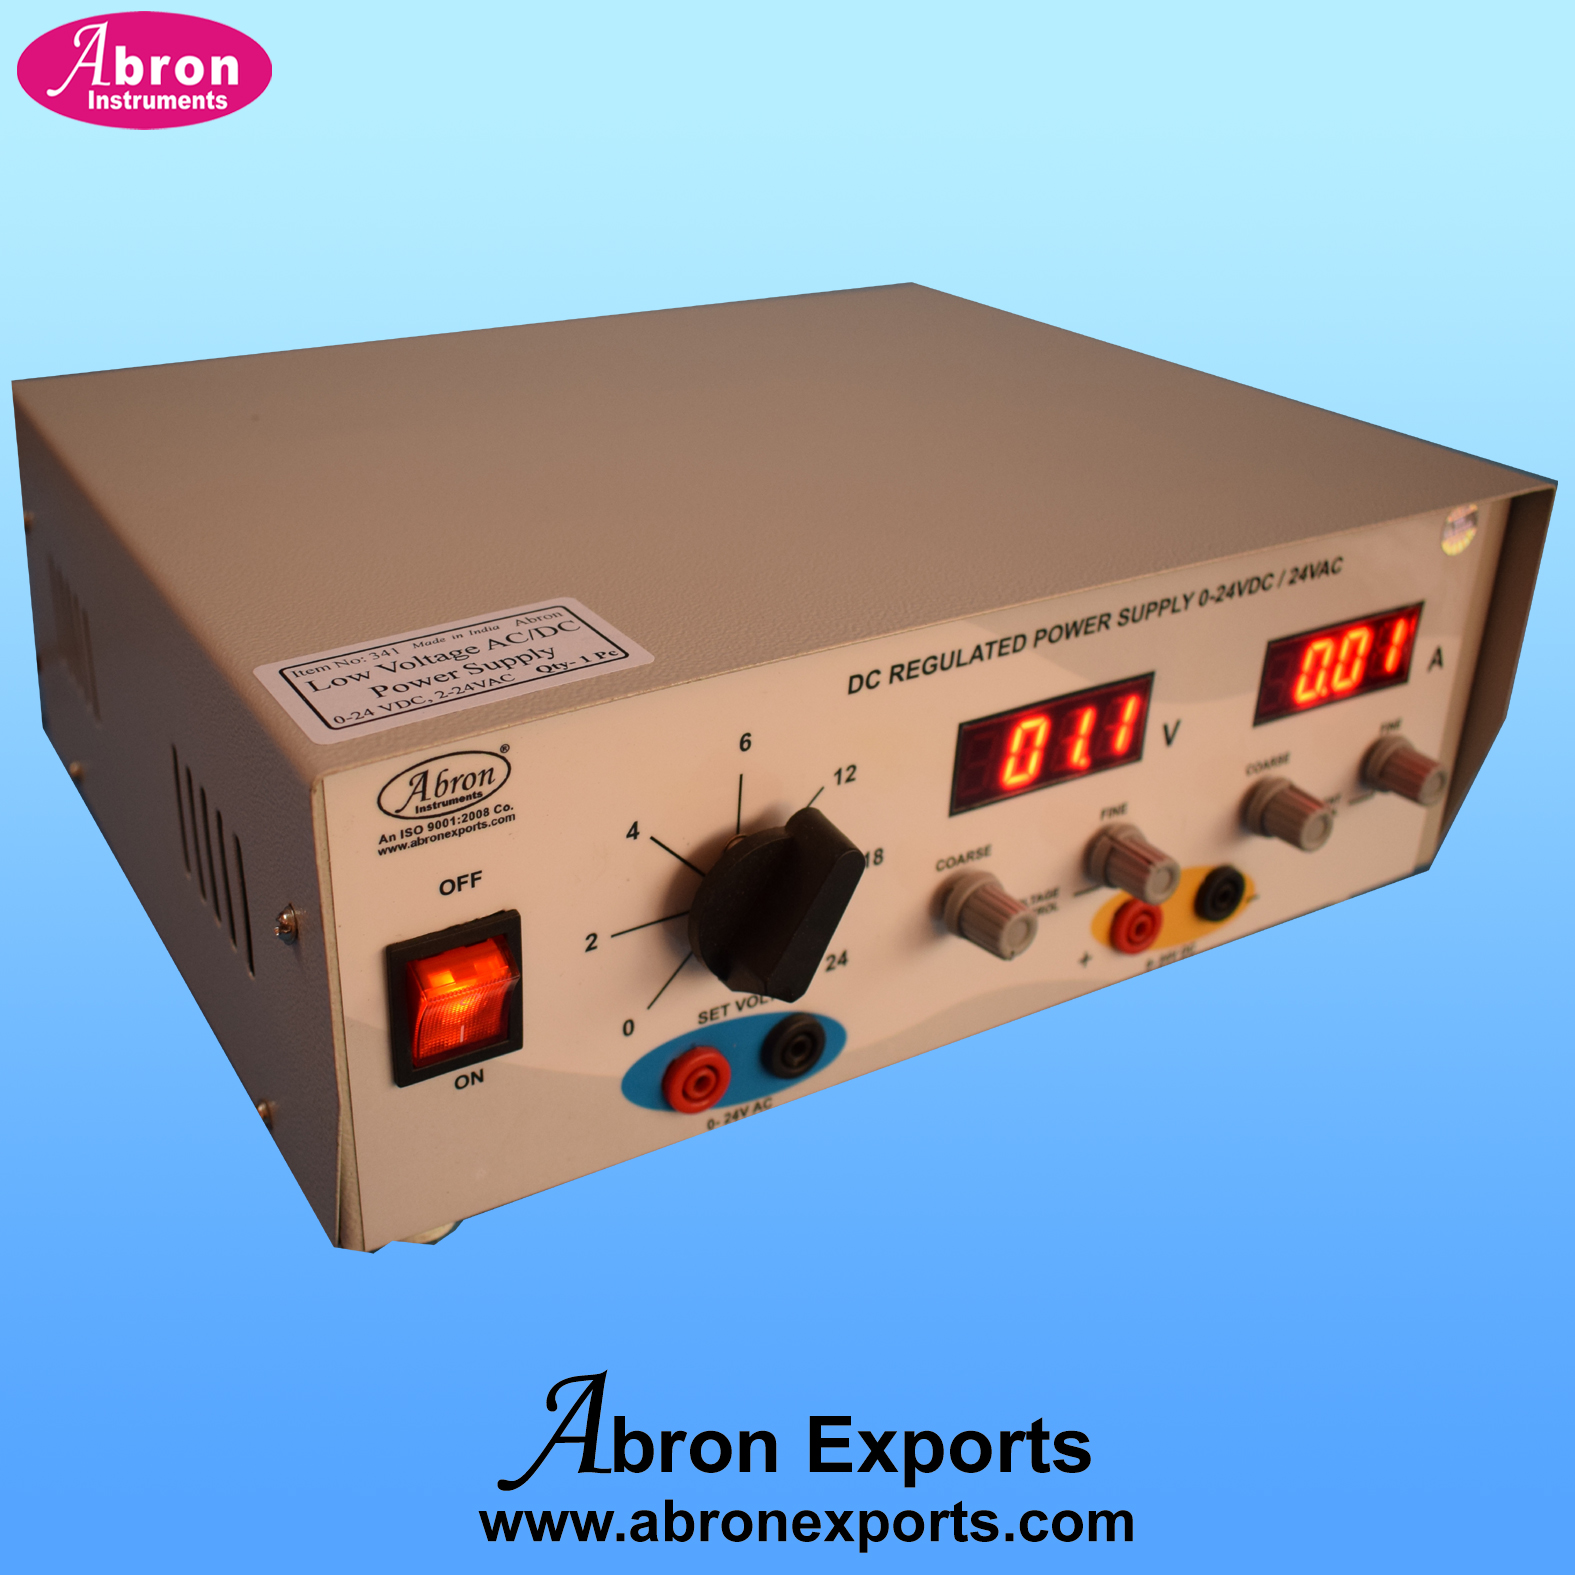 Power supply digital dc 0 30v variable x0.1v 0 6amp both variable stablized with 2meters output terminals abron AE-1377N6